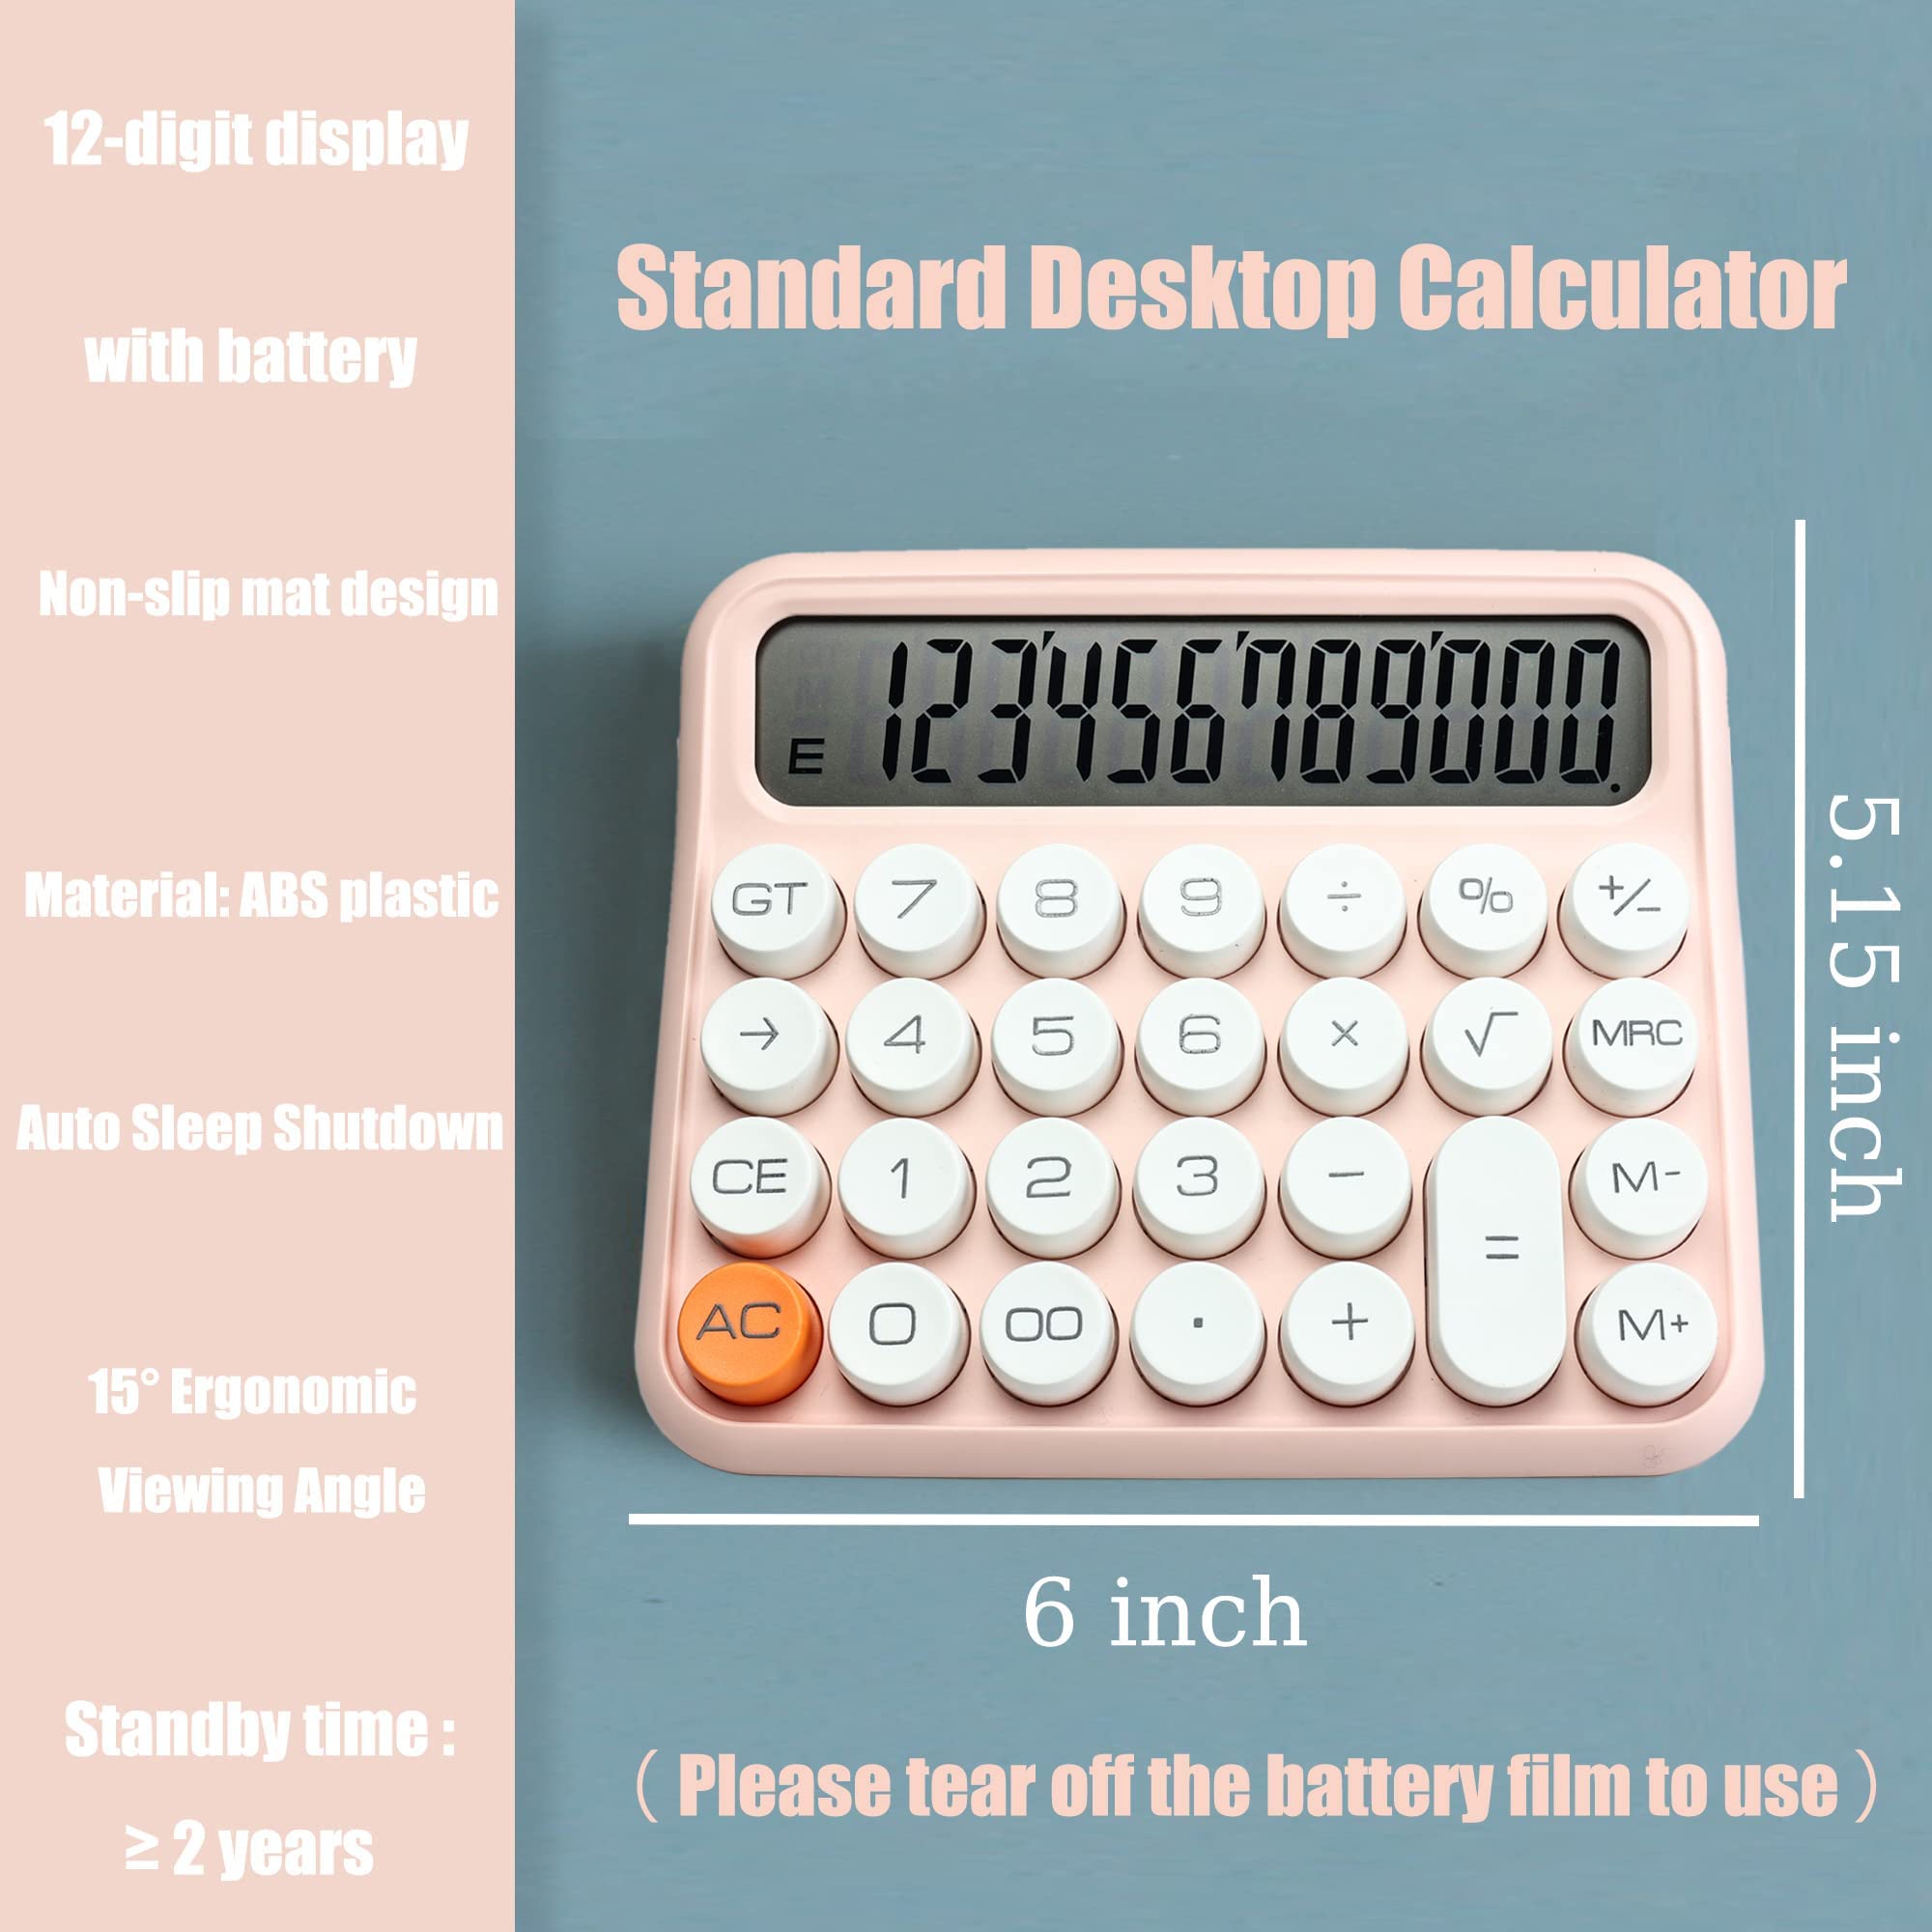 Standard Calculator 12 Digit,Desktop Large Display and Buttons,Pink Calculator with Large LCD Display for Office,School, Home & Business Use,Automatic Sleep,with Battery.6 * 5.15in